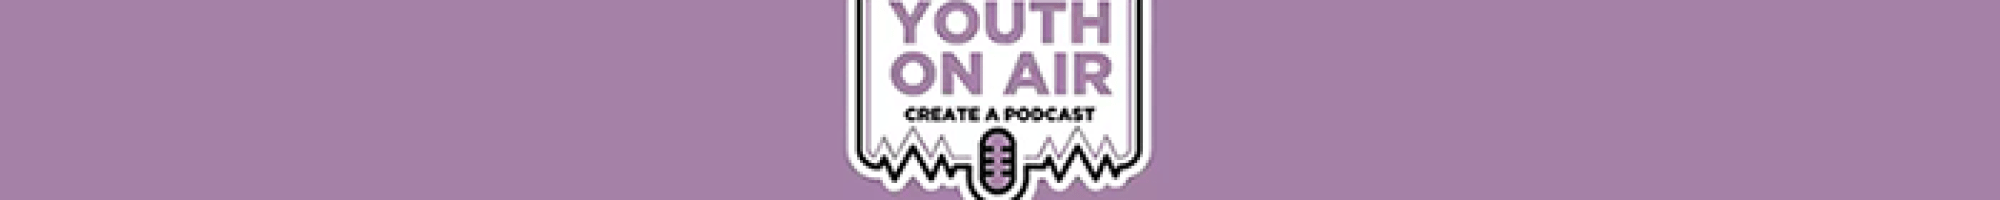 Youth on Air - Create a Podcast